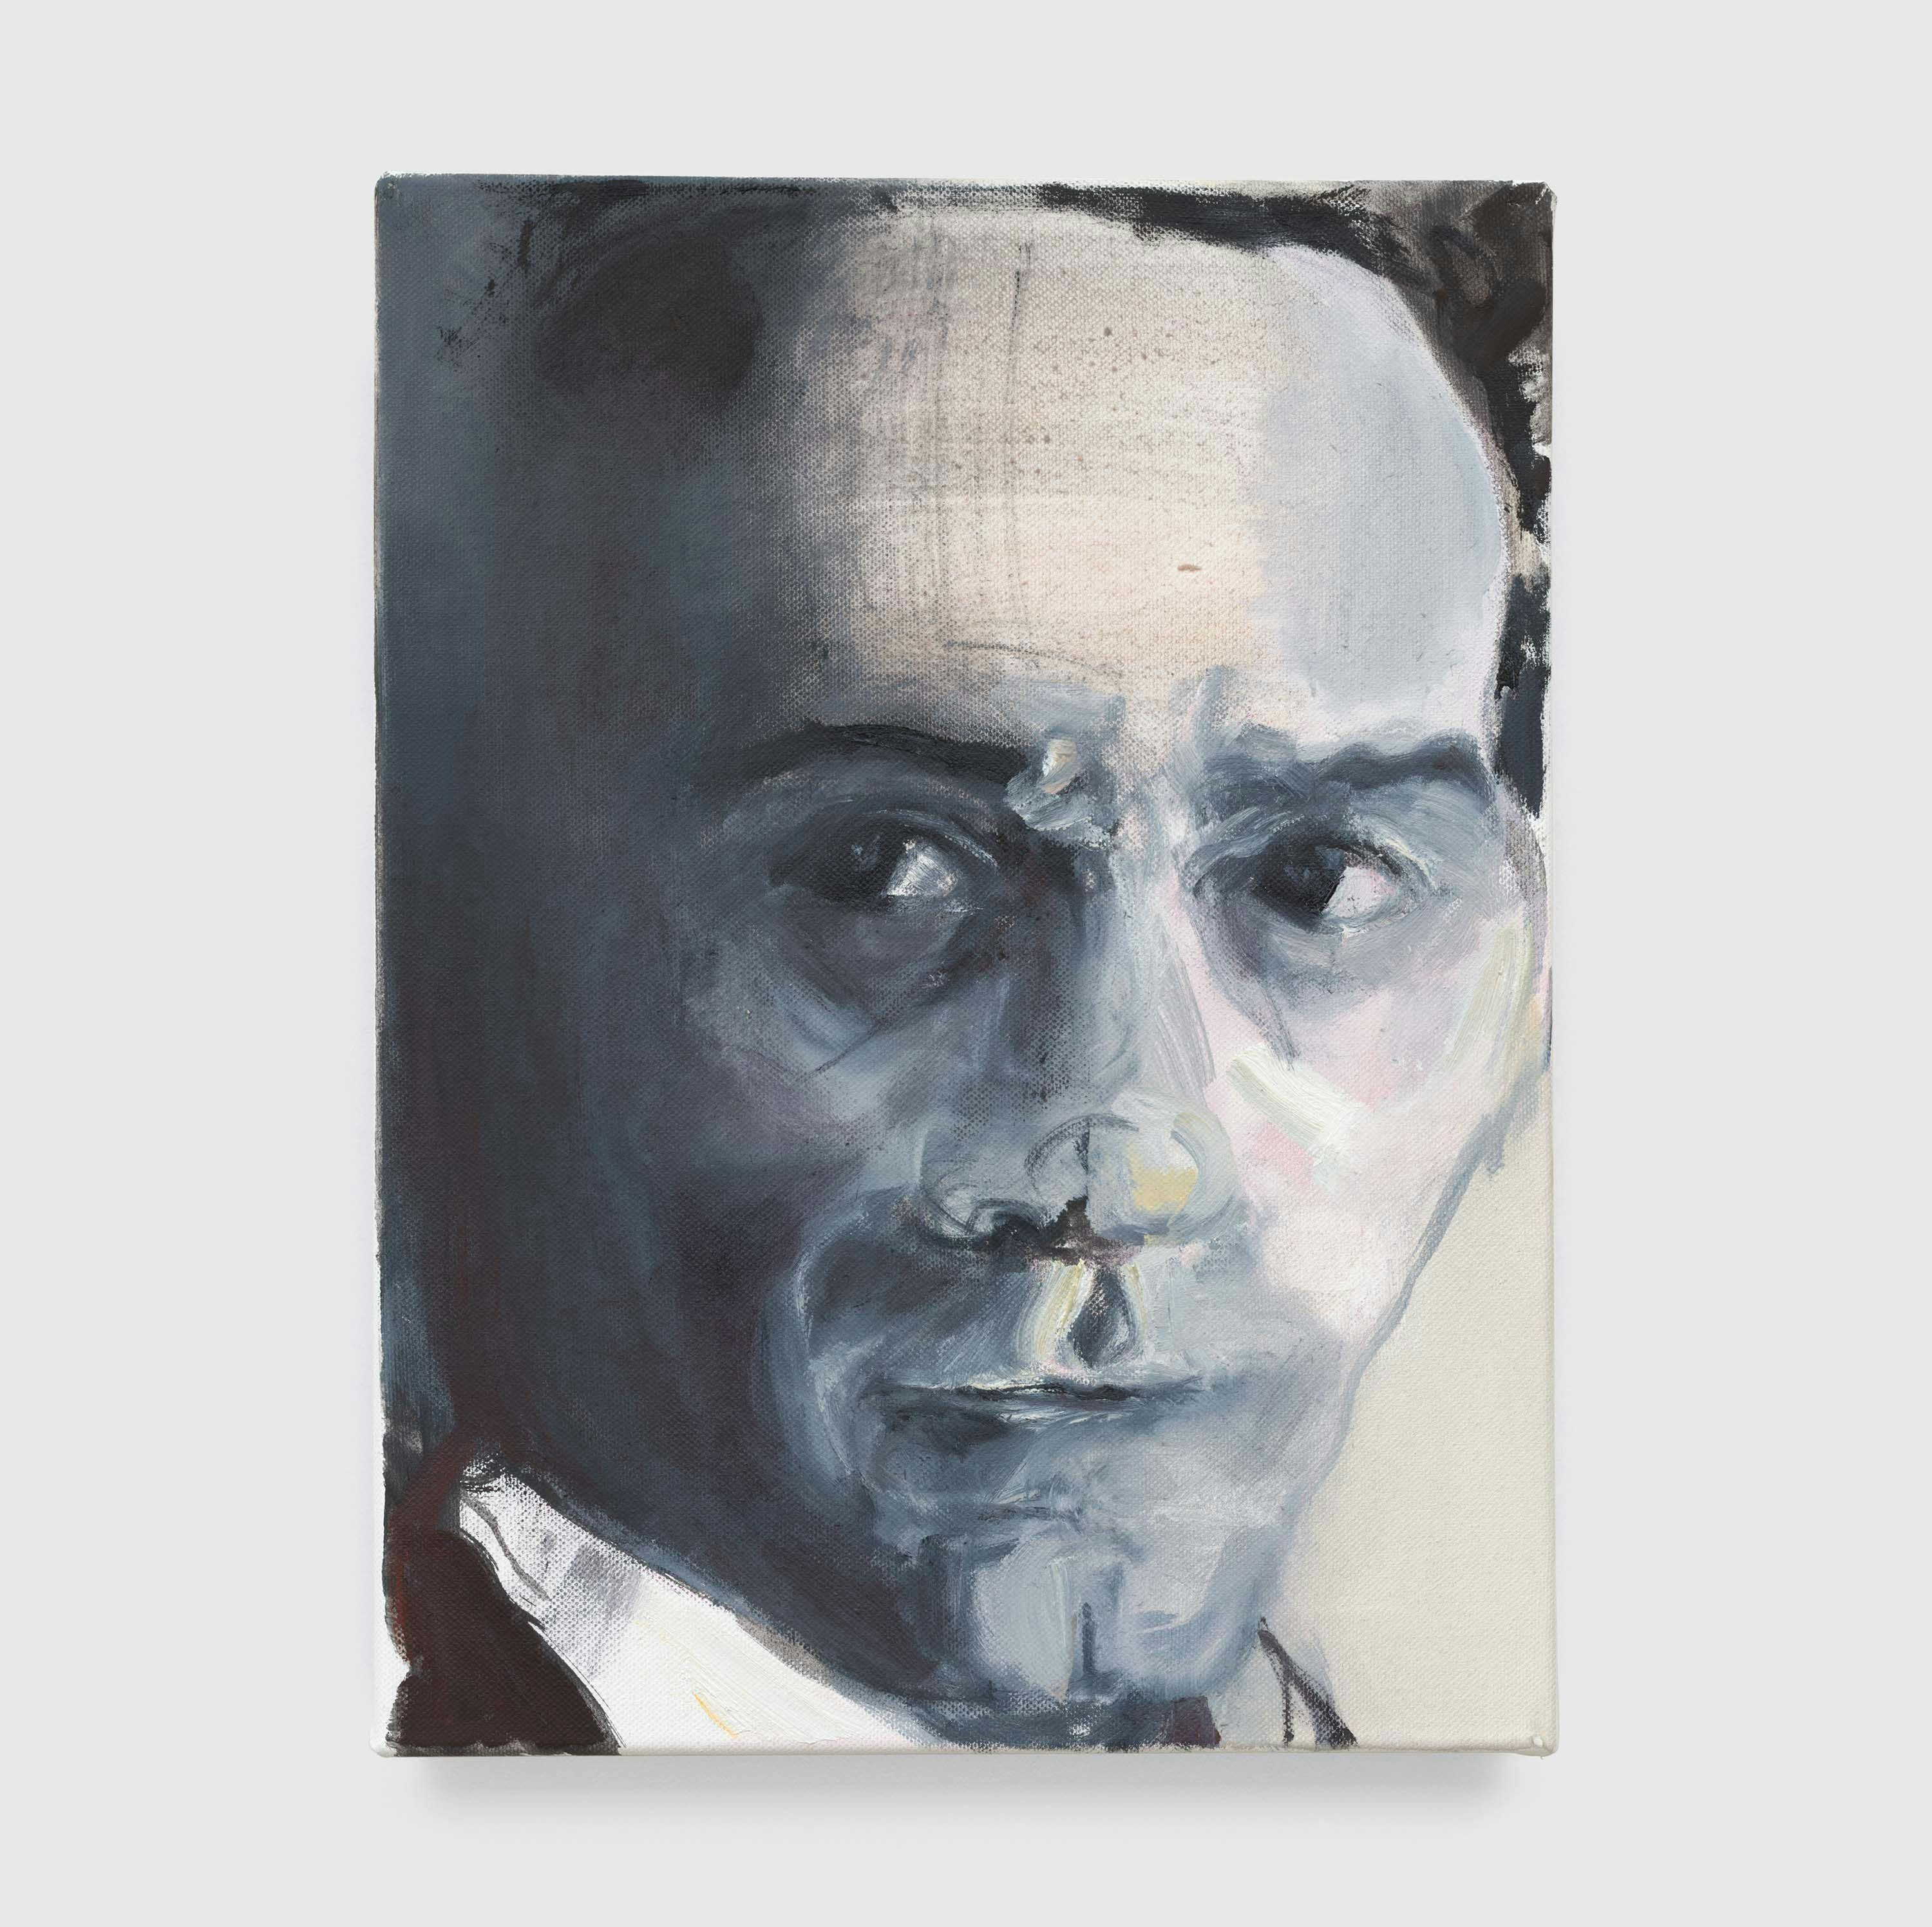 A painting by Marlene Dumas, titled Pasolini, dated 2012.